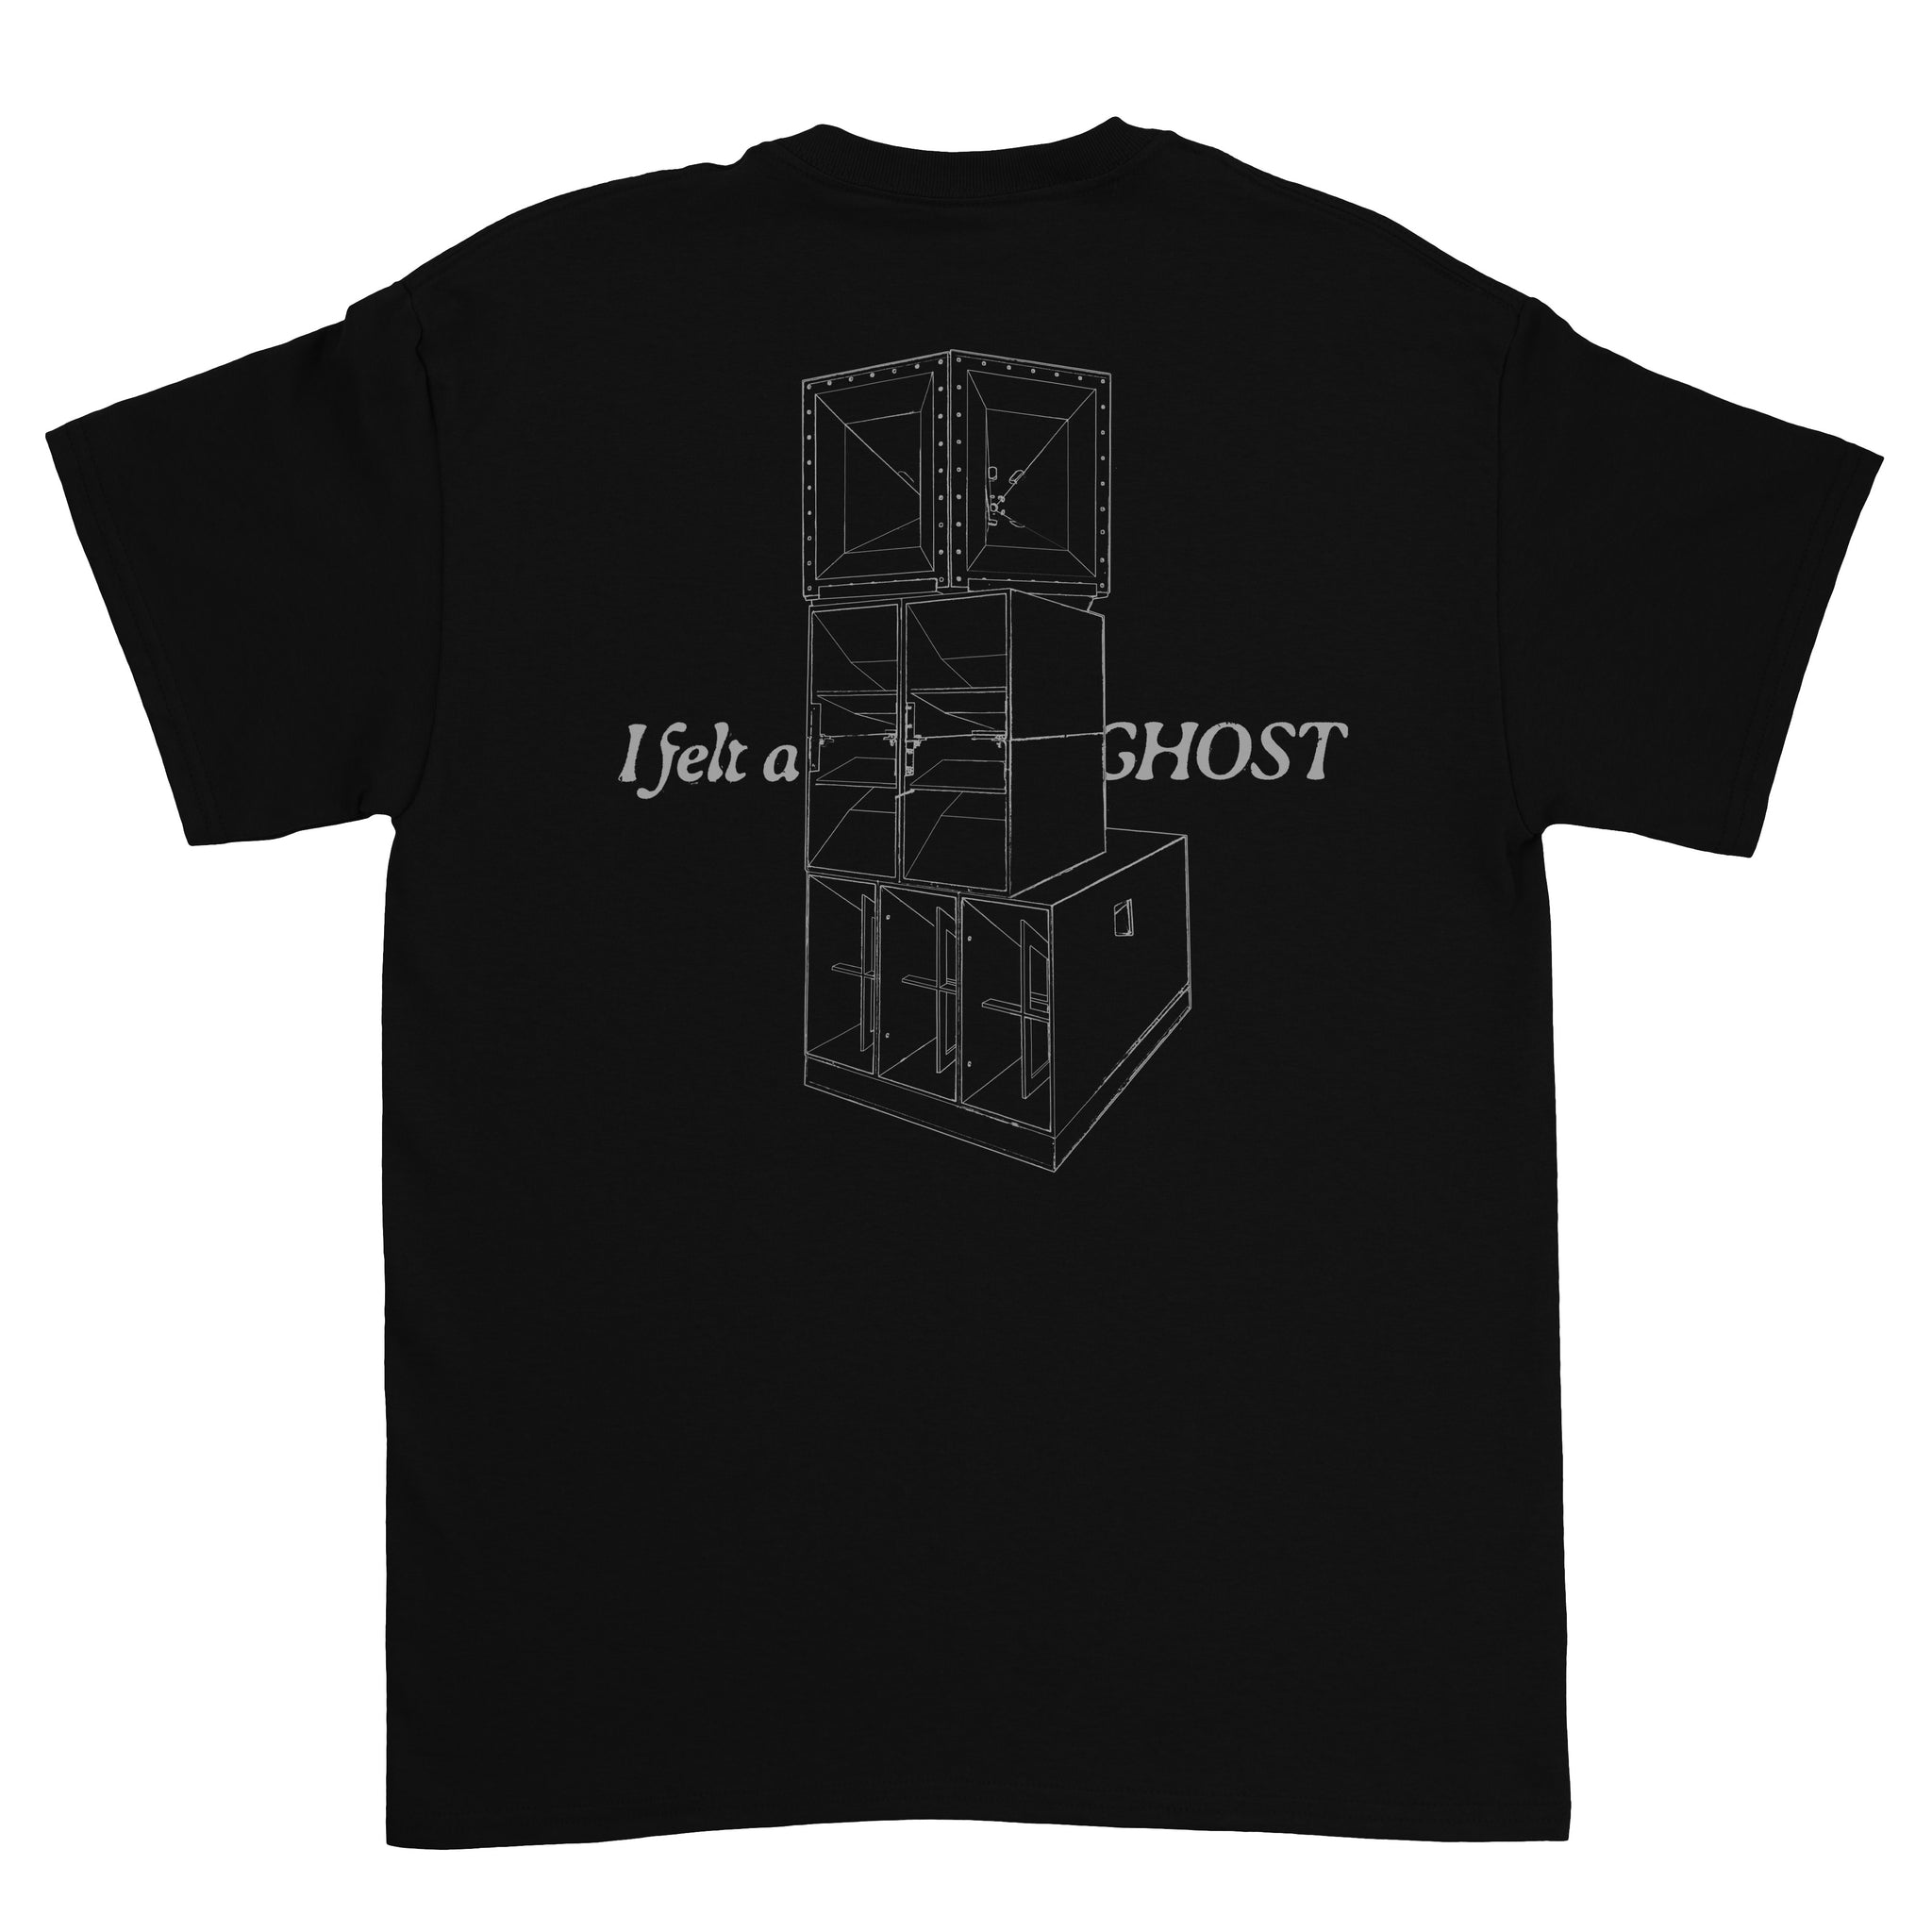 Bassment x "The Ghost" Soundsystem official collaboration Tee